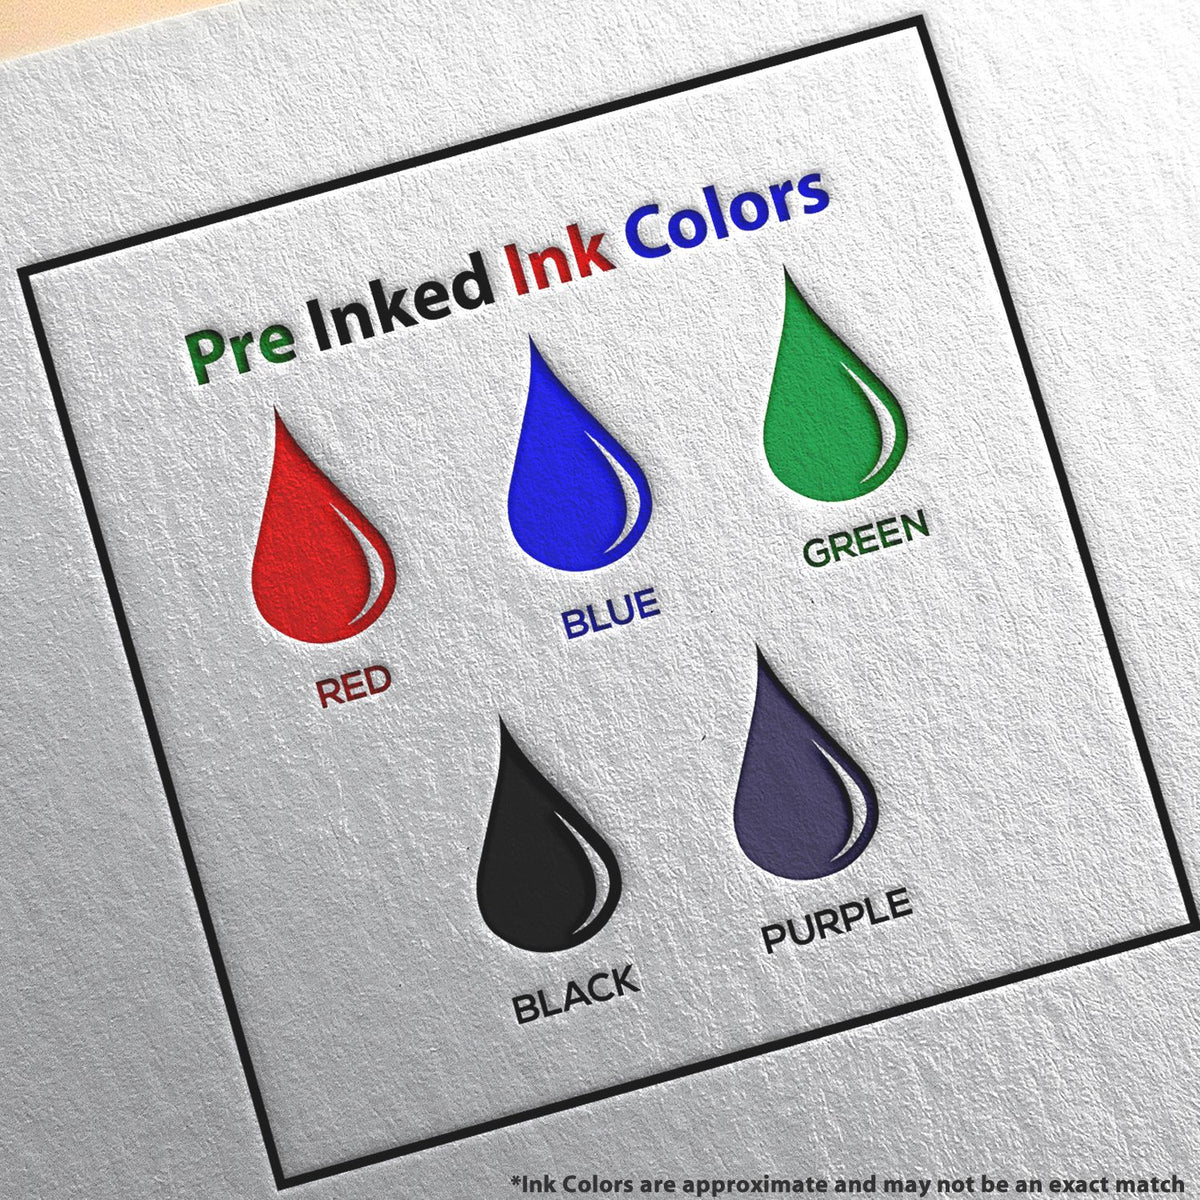 A picture showing the different ink colors or hues available for the MaxLight Premium Pre-Inked South Carolina State Seal Notarial Stamp product.